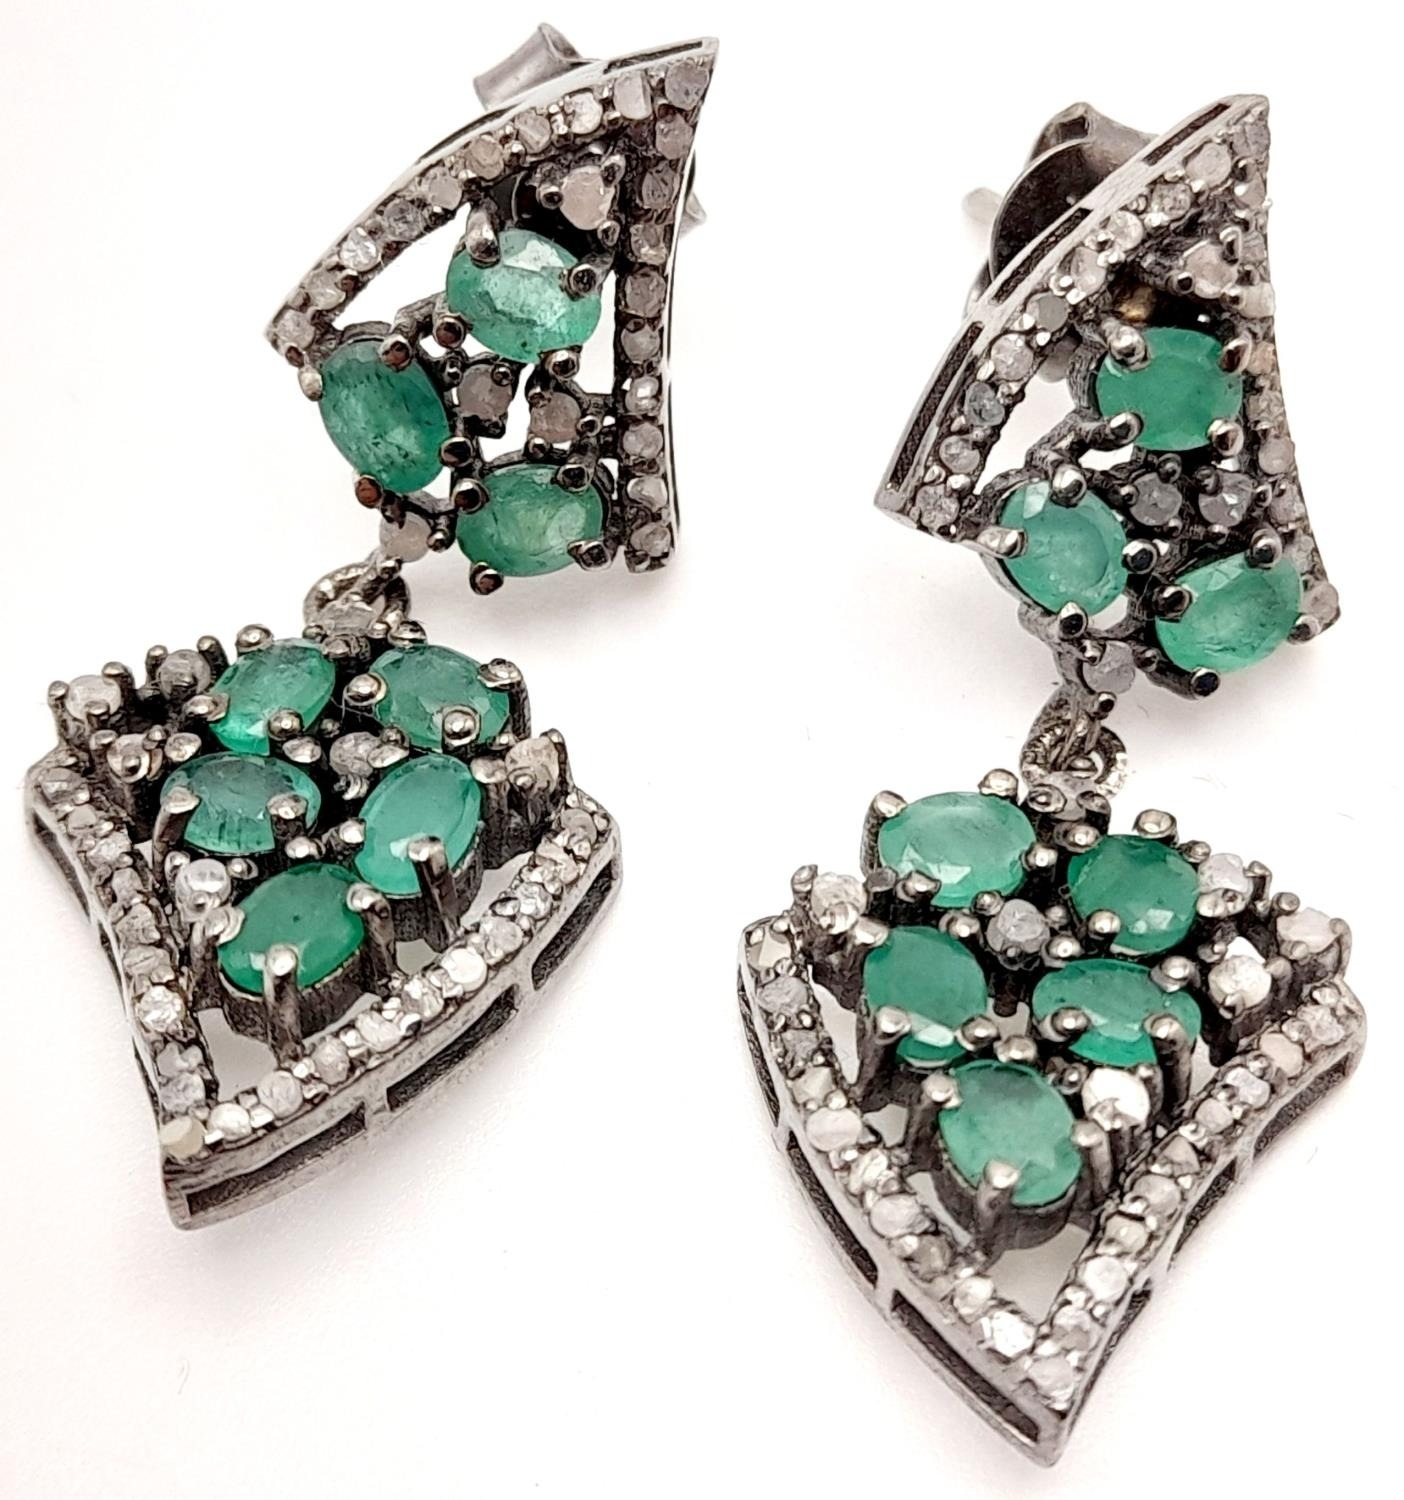 A beautiful Late Victorian or Edwardian pair of silver earrings with numerous old cut diamonds and - Image 3 of 5